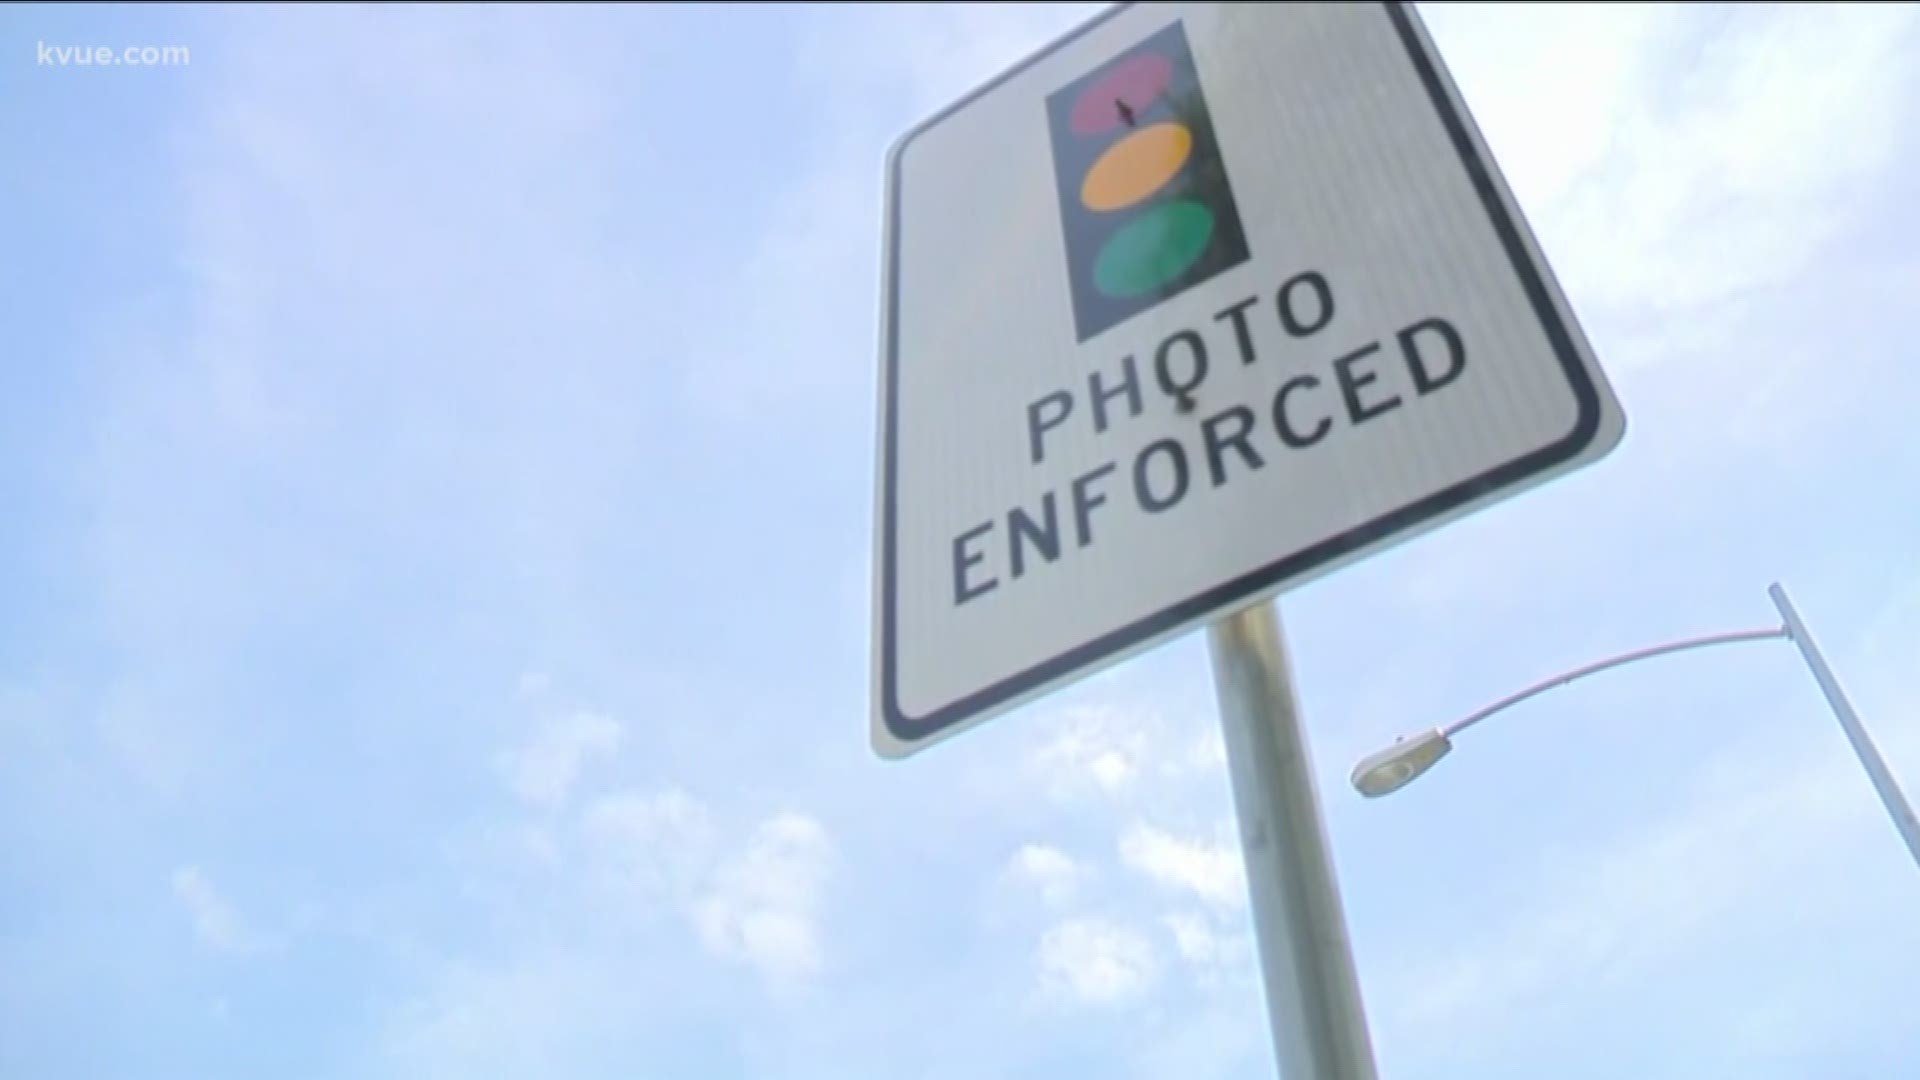 Red light cameras could be a thing of the past. The Texas House of Representatives passed a bill Wednesday to phase them out and ban them.